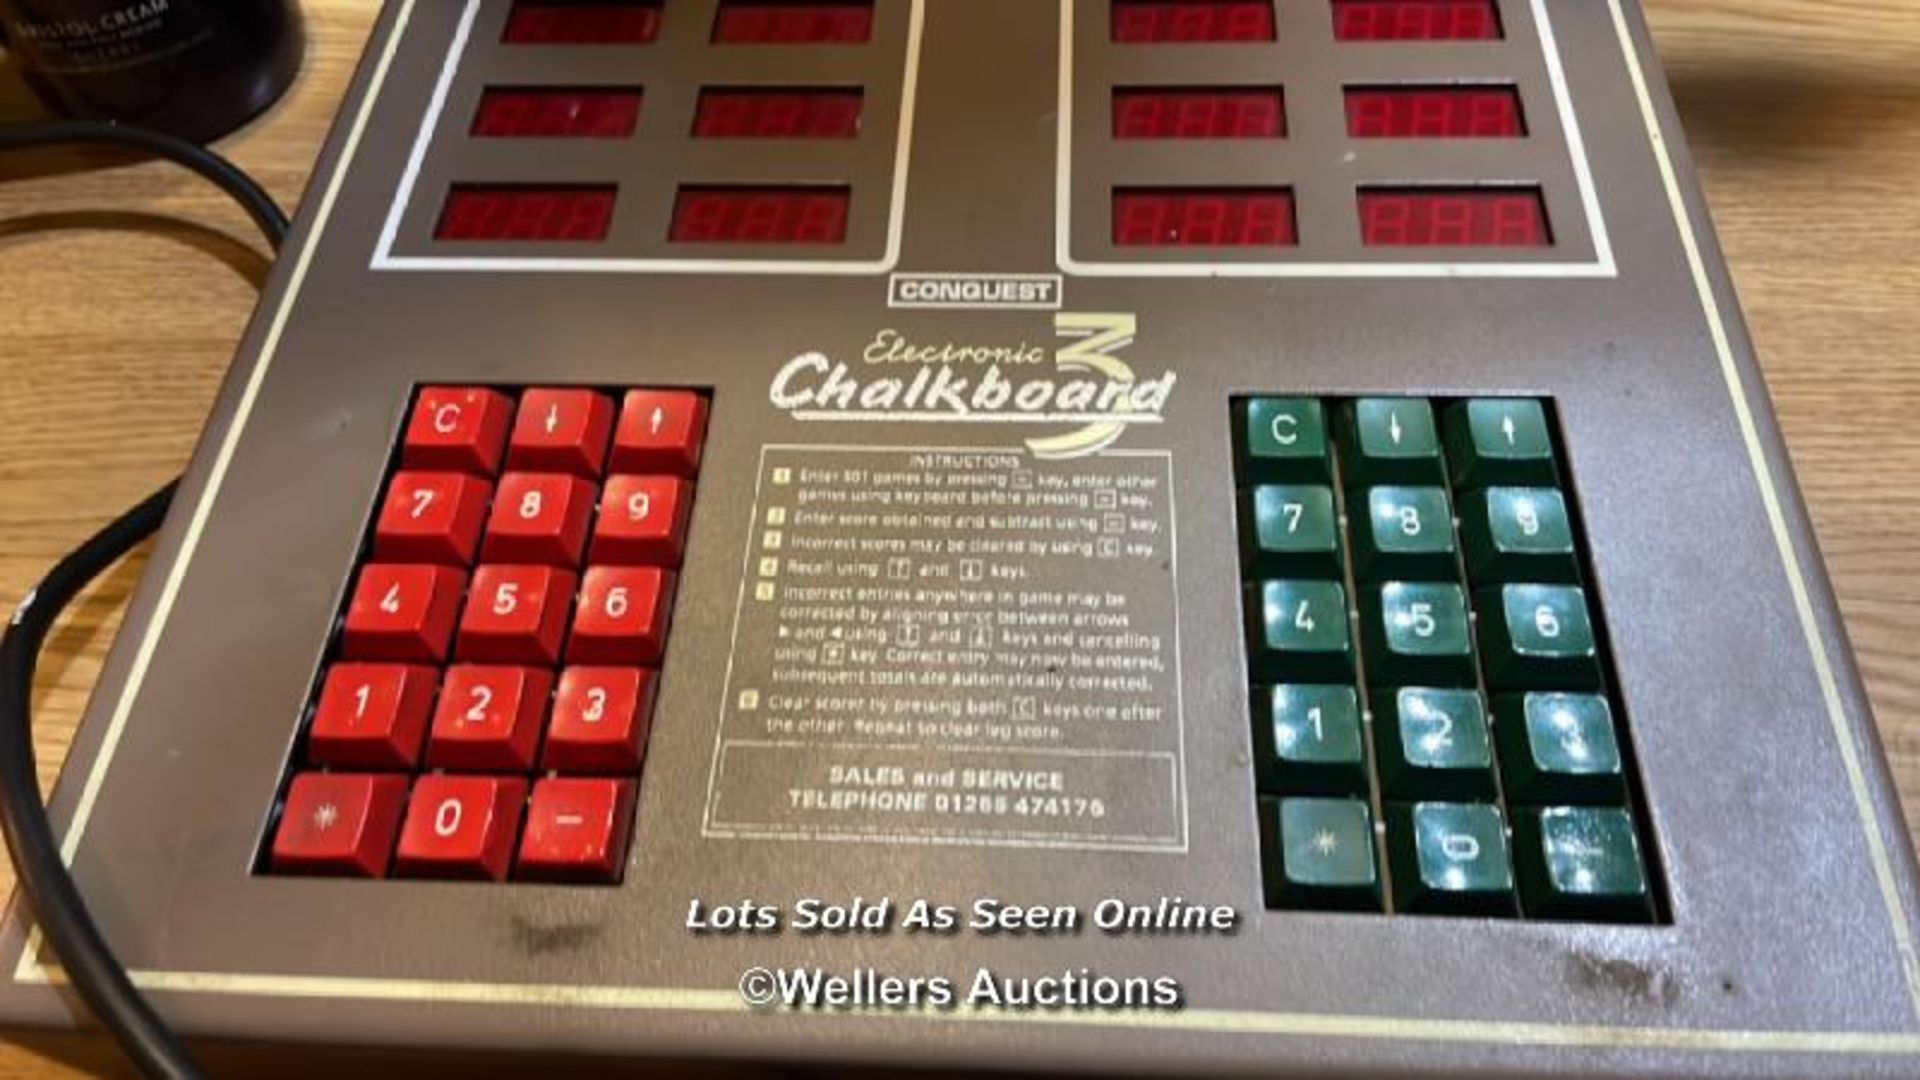 CONQUEST ELECTRONIC 3 CHALKBOARD, DART SCORE BOARD / COLLECTION LOCATION: OLD WOKING DISTRICT - Image 2 of 3